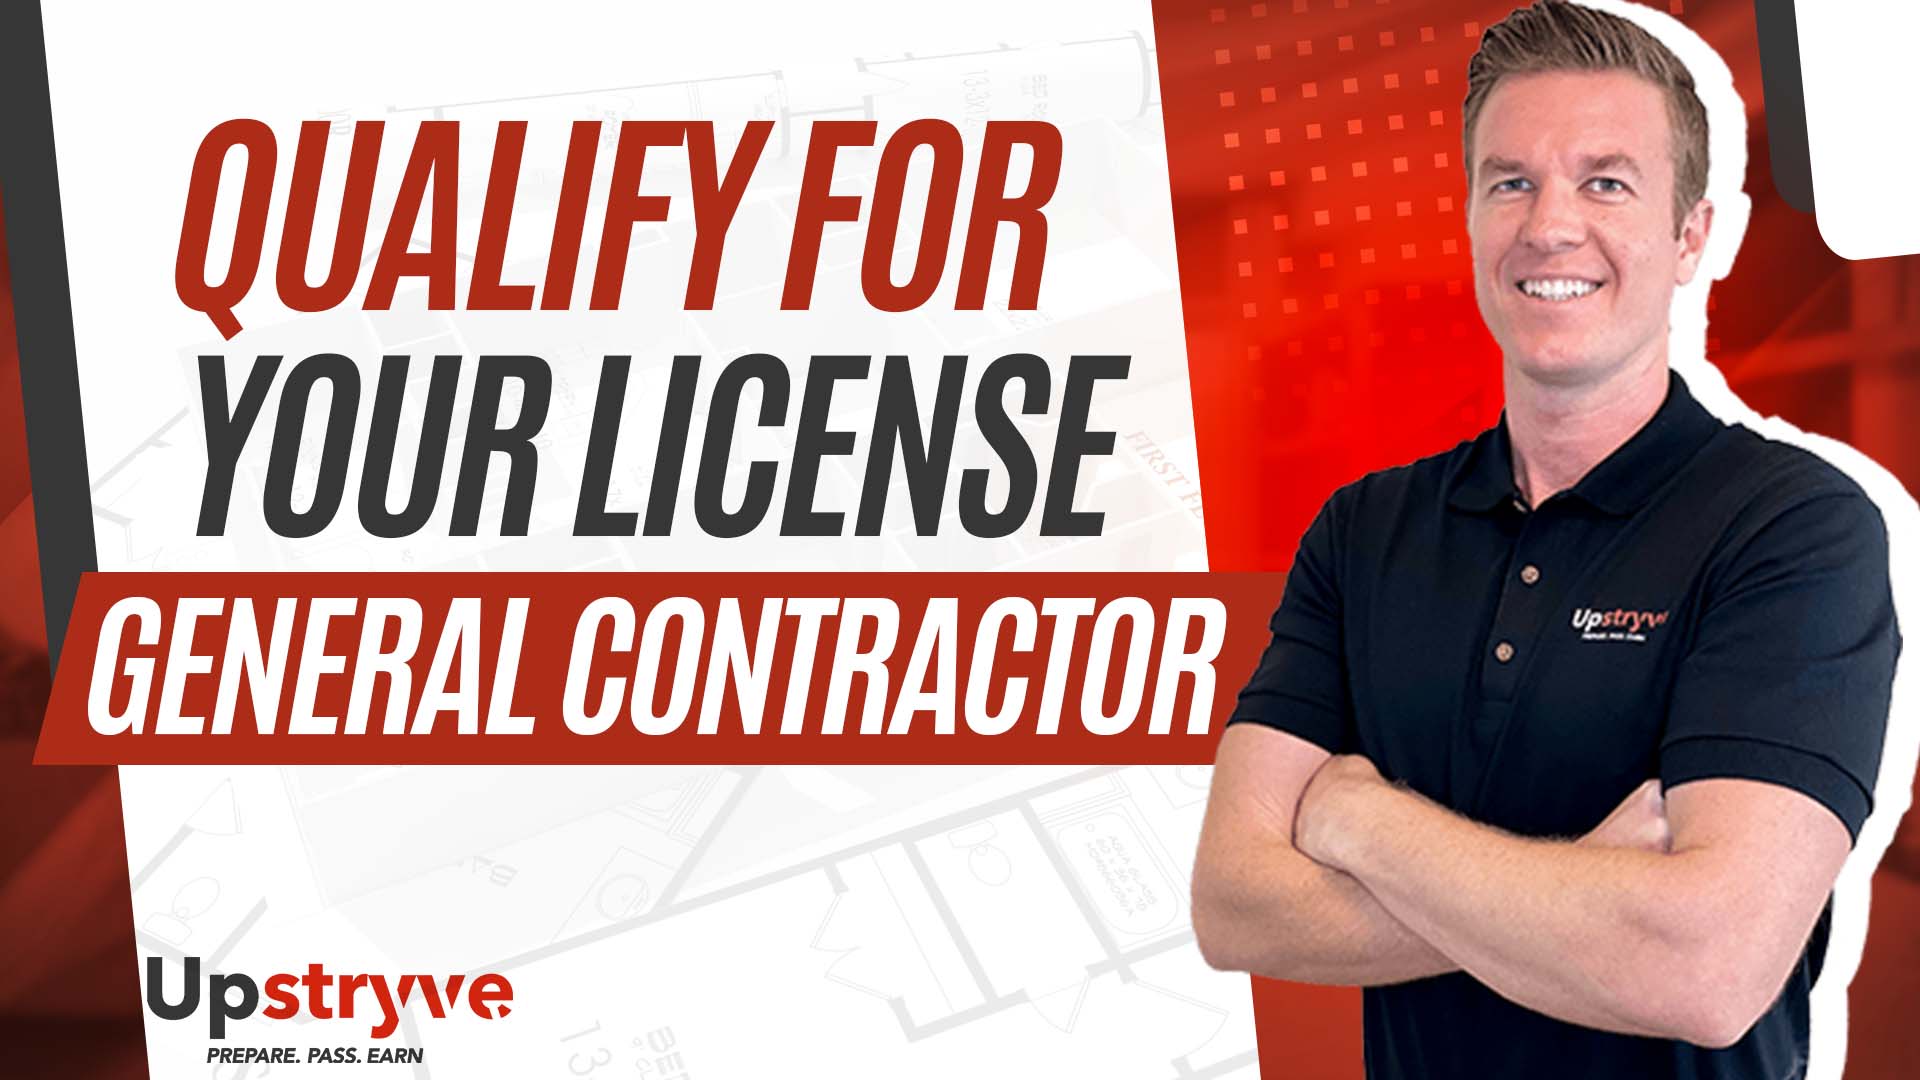 Licensing Expert J.D. Myers goes over a few different things to keep in mind while working towards your General Contractor License. A requirement many people aren't aware of is keeping track of the work you've done in previous years. This is incredibly important since it proves to the state that you have the field experience needed to qualify for your General Contractor's License. Watch this video and learn some important things to keep track of along the way to getting your General Contractor License.